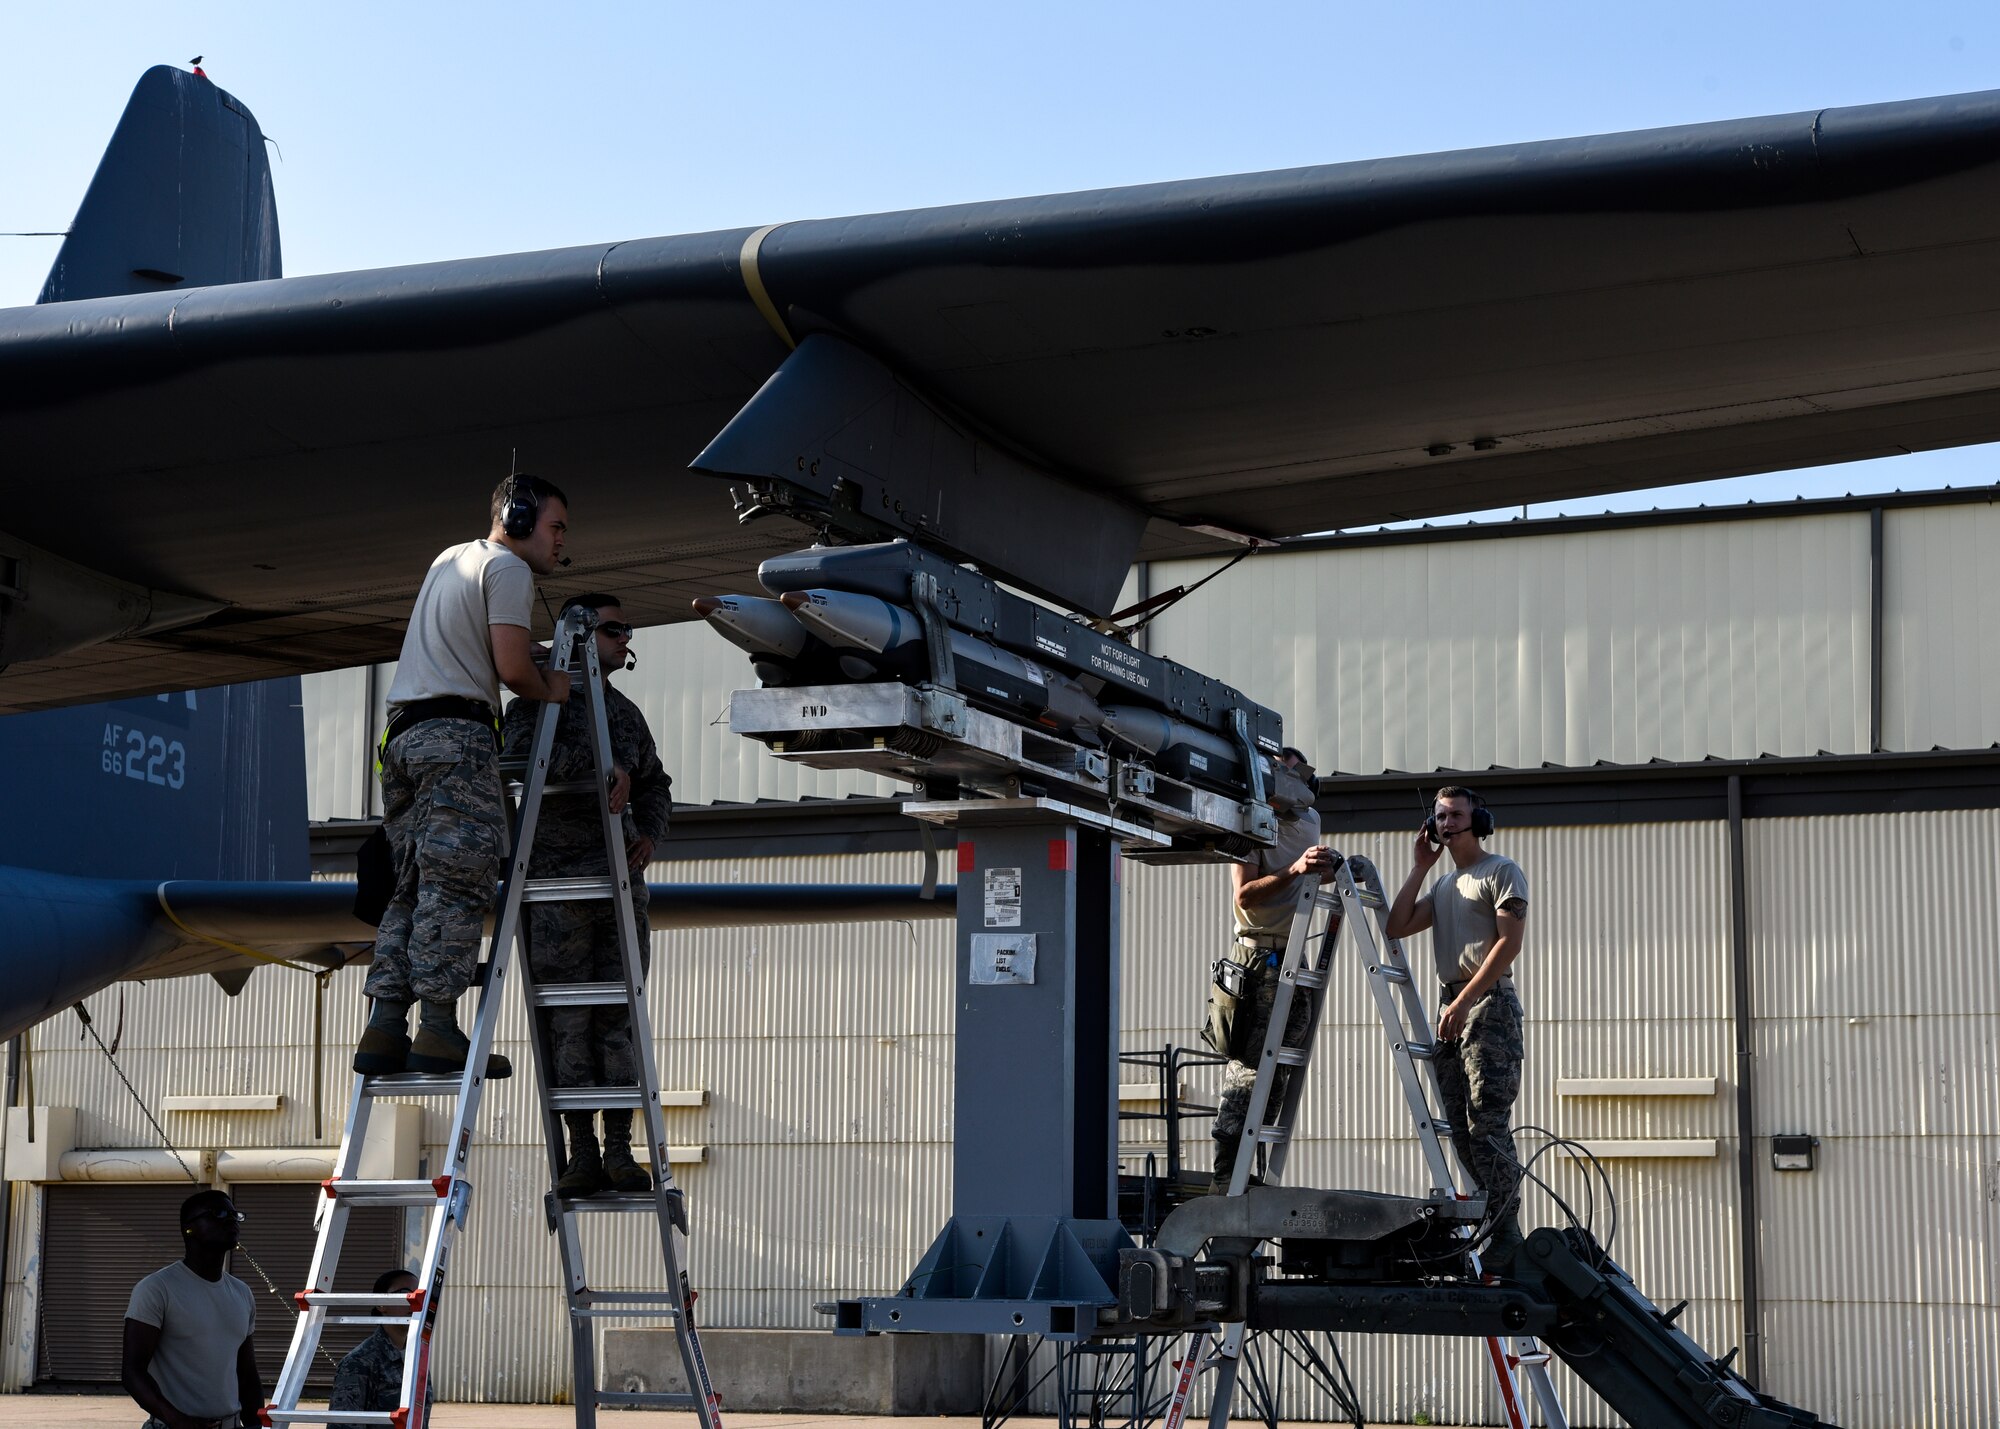 Airmen stand on ladders to make sure the loading bombs are aligned correctly.